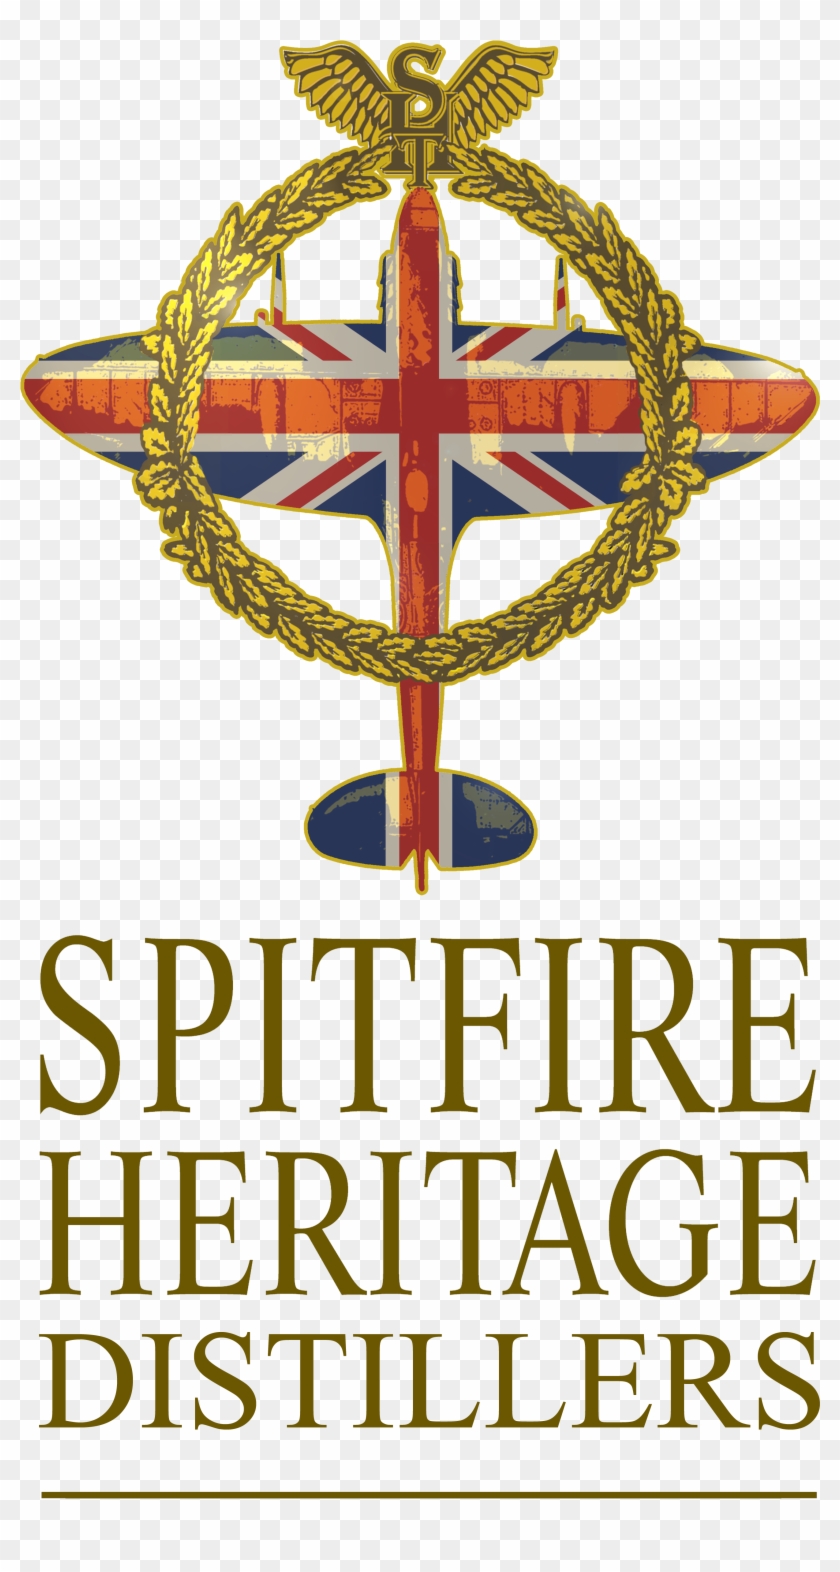 Spitfire Heritage Distillers Logo - Heritage Valley Health Systems Logo Clipart #4526453